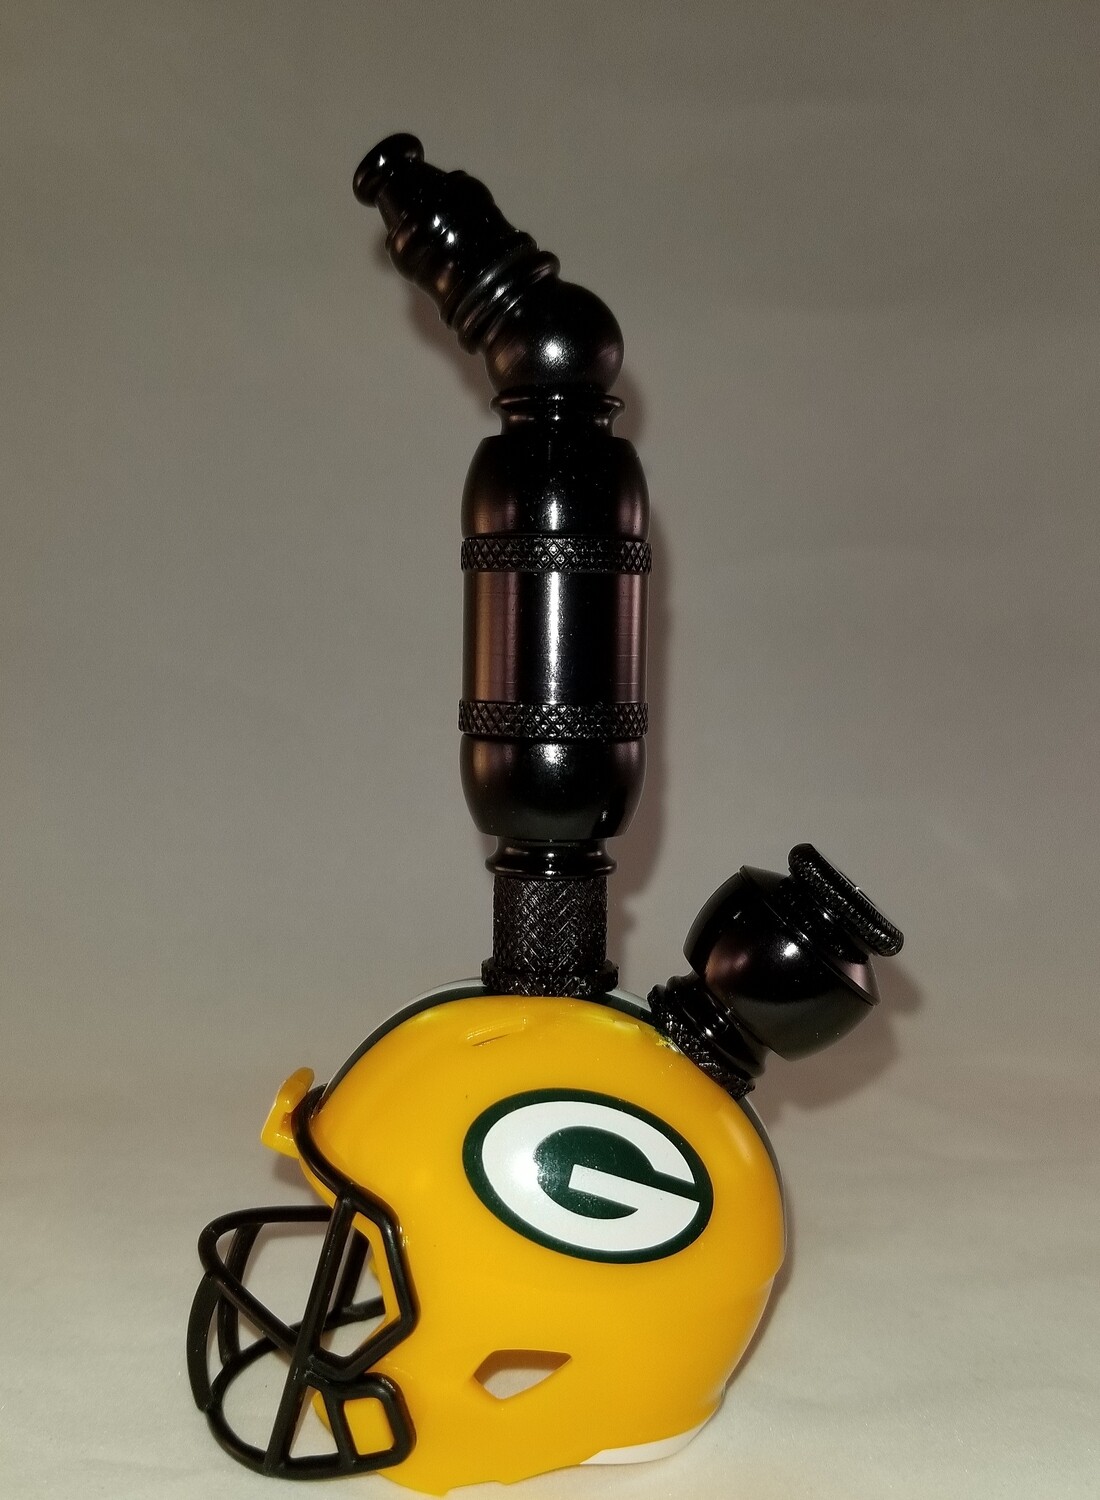 GREEN BAY PACKERS "BAD ASS" NFL FOOTBALL HELMET SMOKING PIPE Upright/Black Anodized